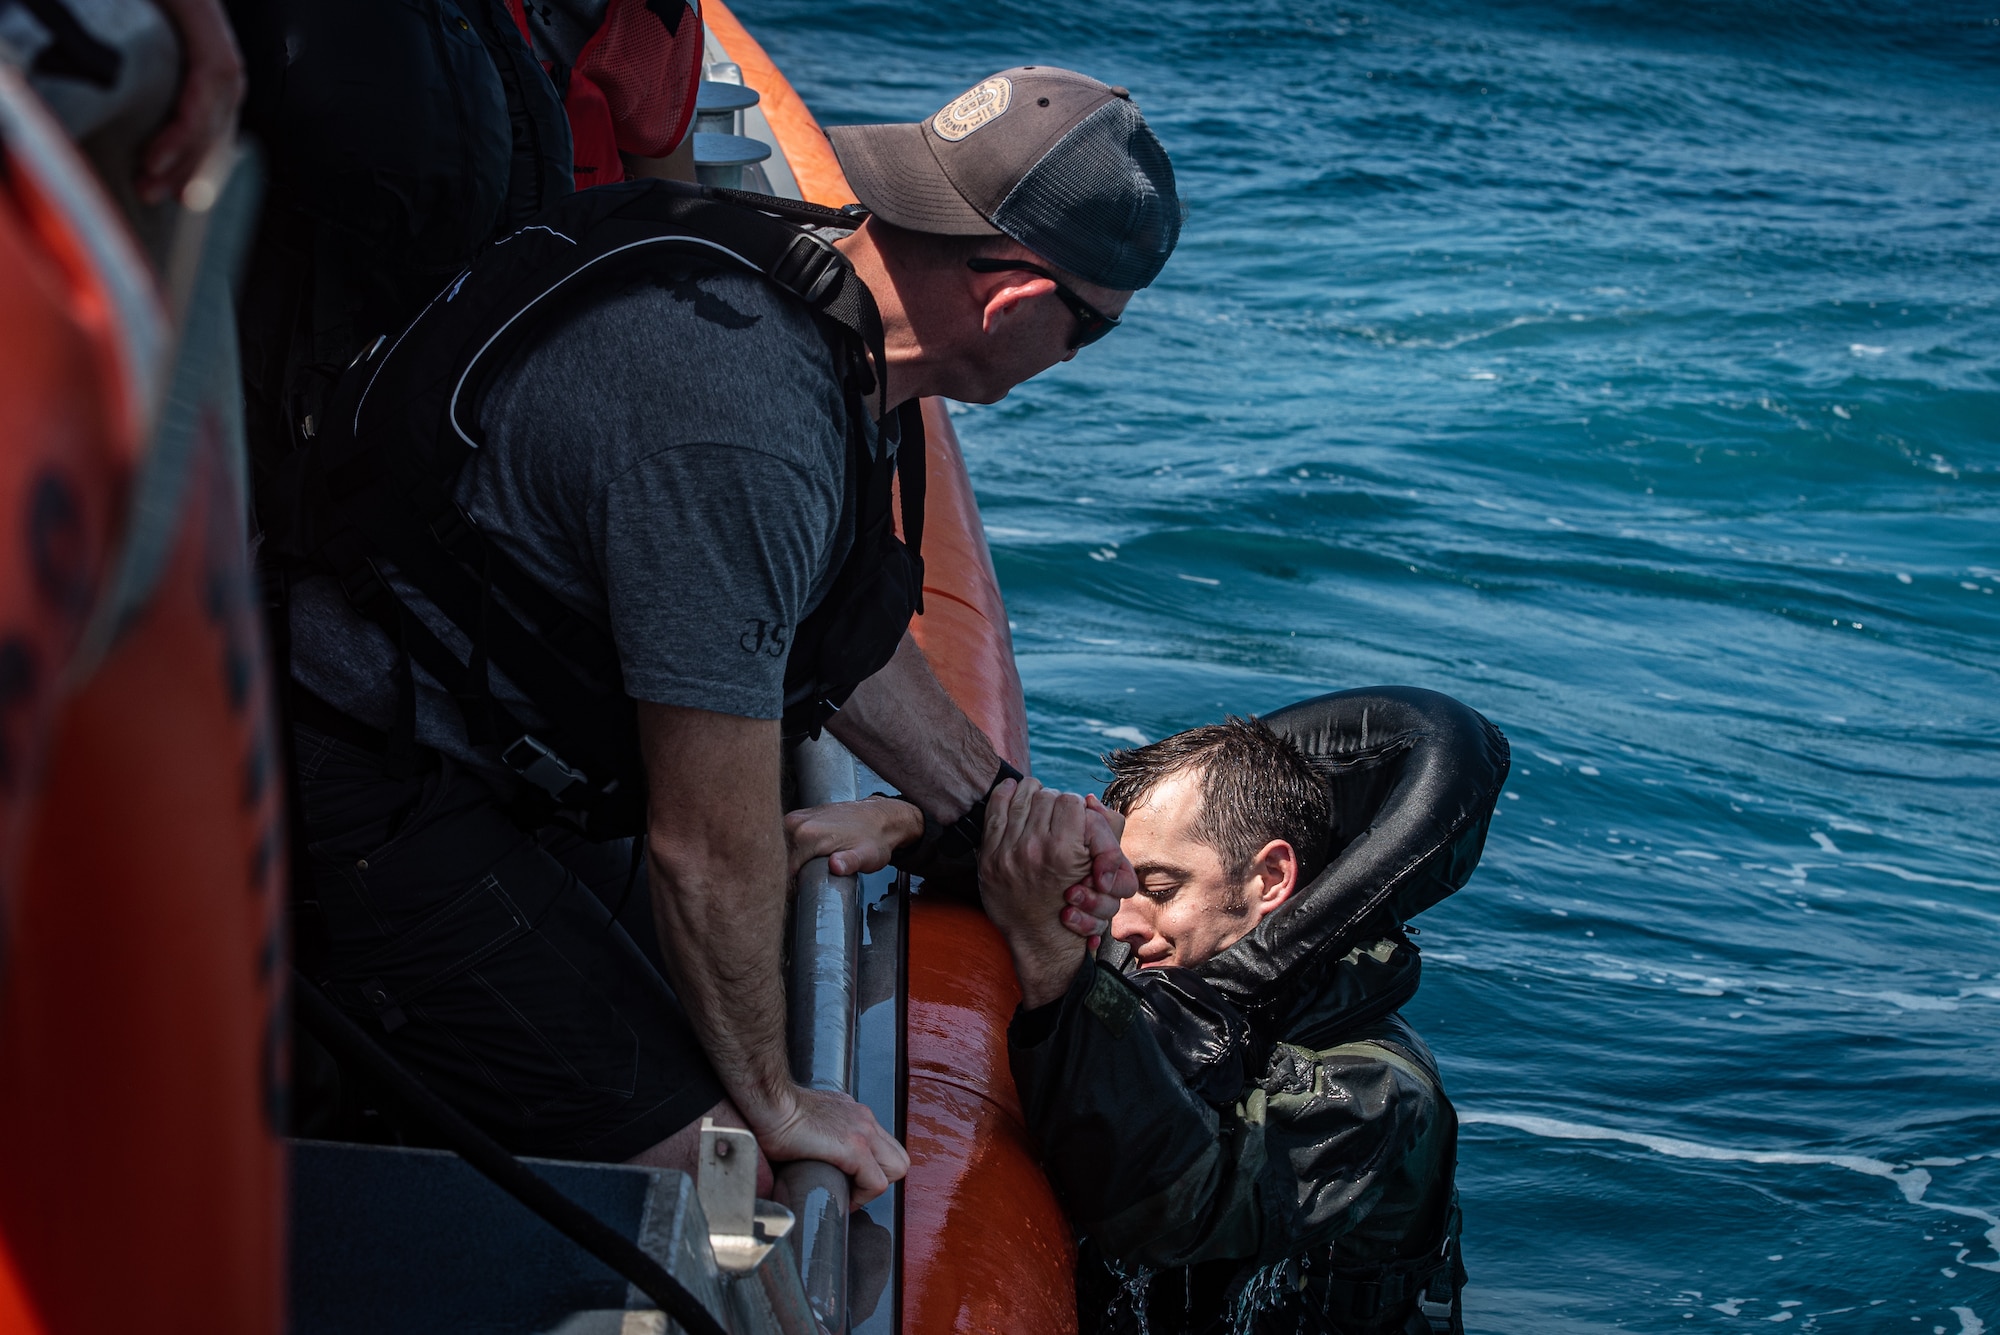 U.S. Air Force Tech. Sgt. David Jones, 20th Operations Support Squadron survival, evasion, resistance and escape non-commissioned officer in charge (left) helps U.S. Air Force Capt. Scott Brandon out of the water off the coast of Tybee Island Coast Guard Station, Georgia, June 21. 2019.